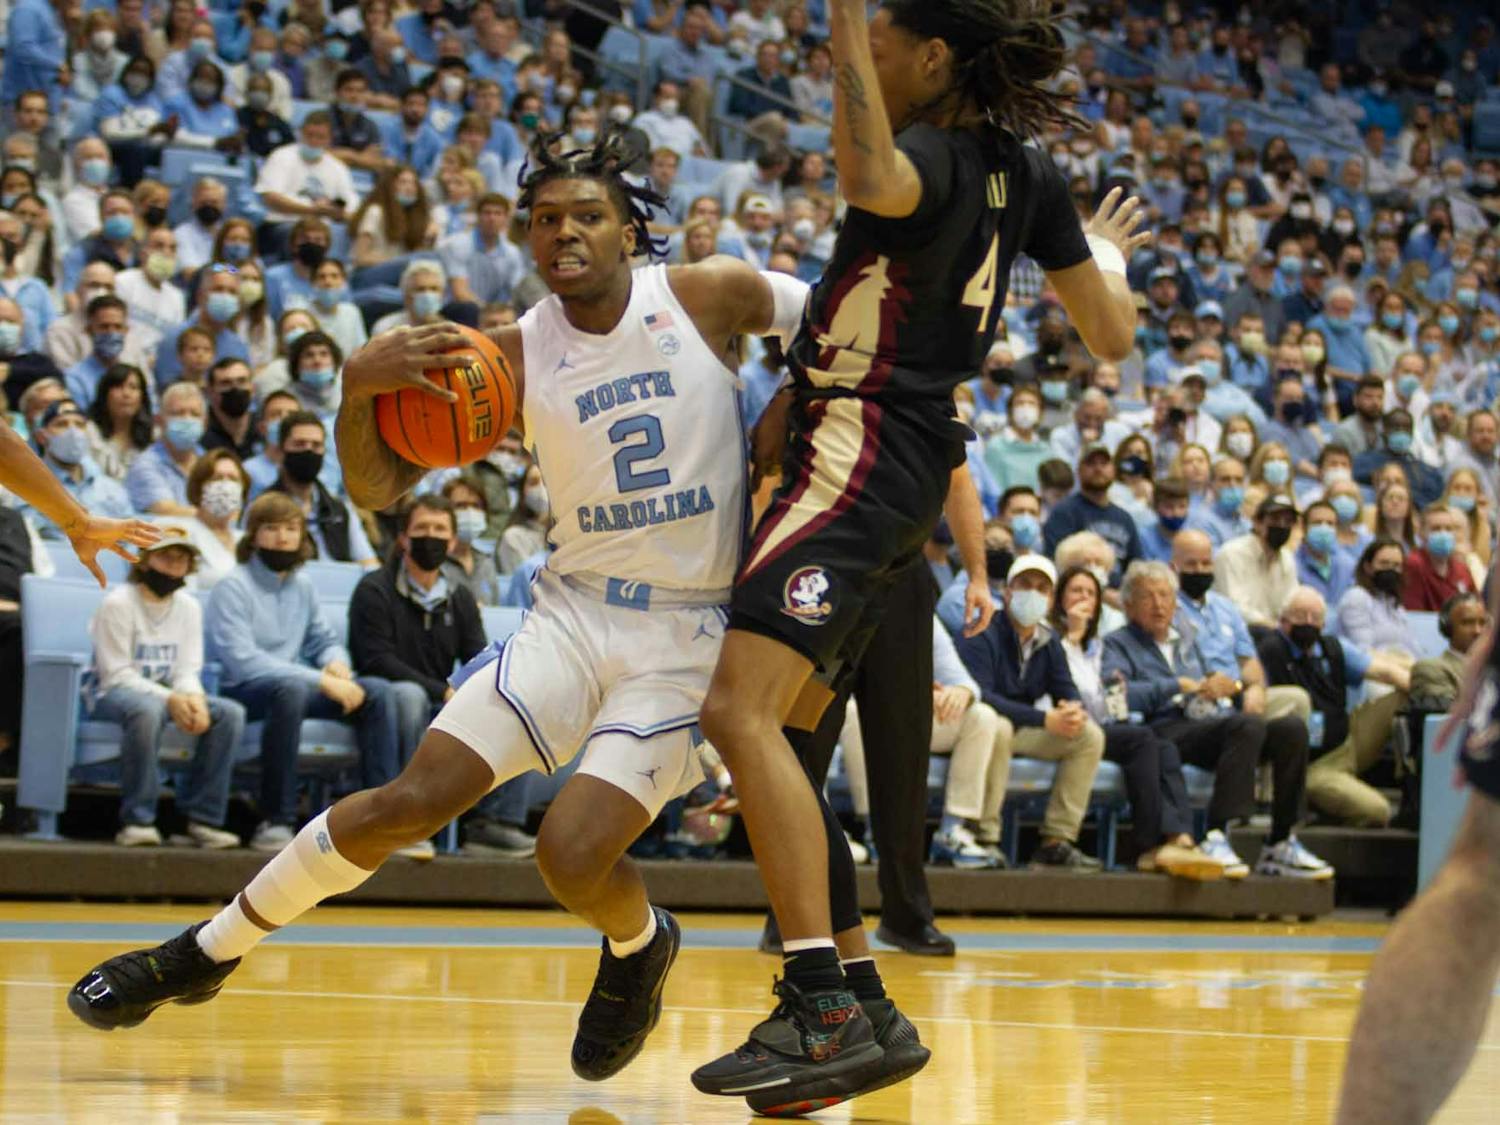 Sophomore guard Caleb Love (2) tries to drive past his defender for a layup during the matchup against Florida State on Feb. 12, 2022 at the Dean E. Smith Center in Chapel Hill. Love ended with 18 points.